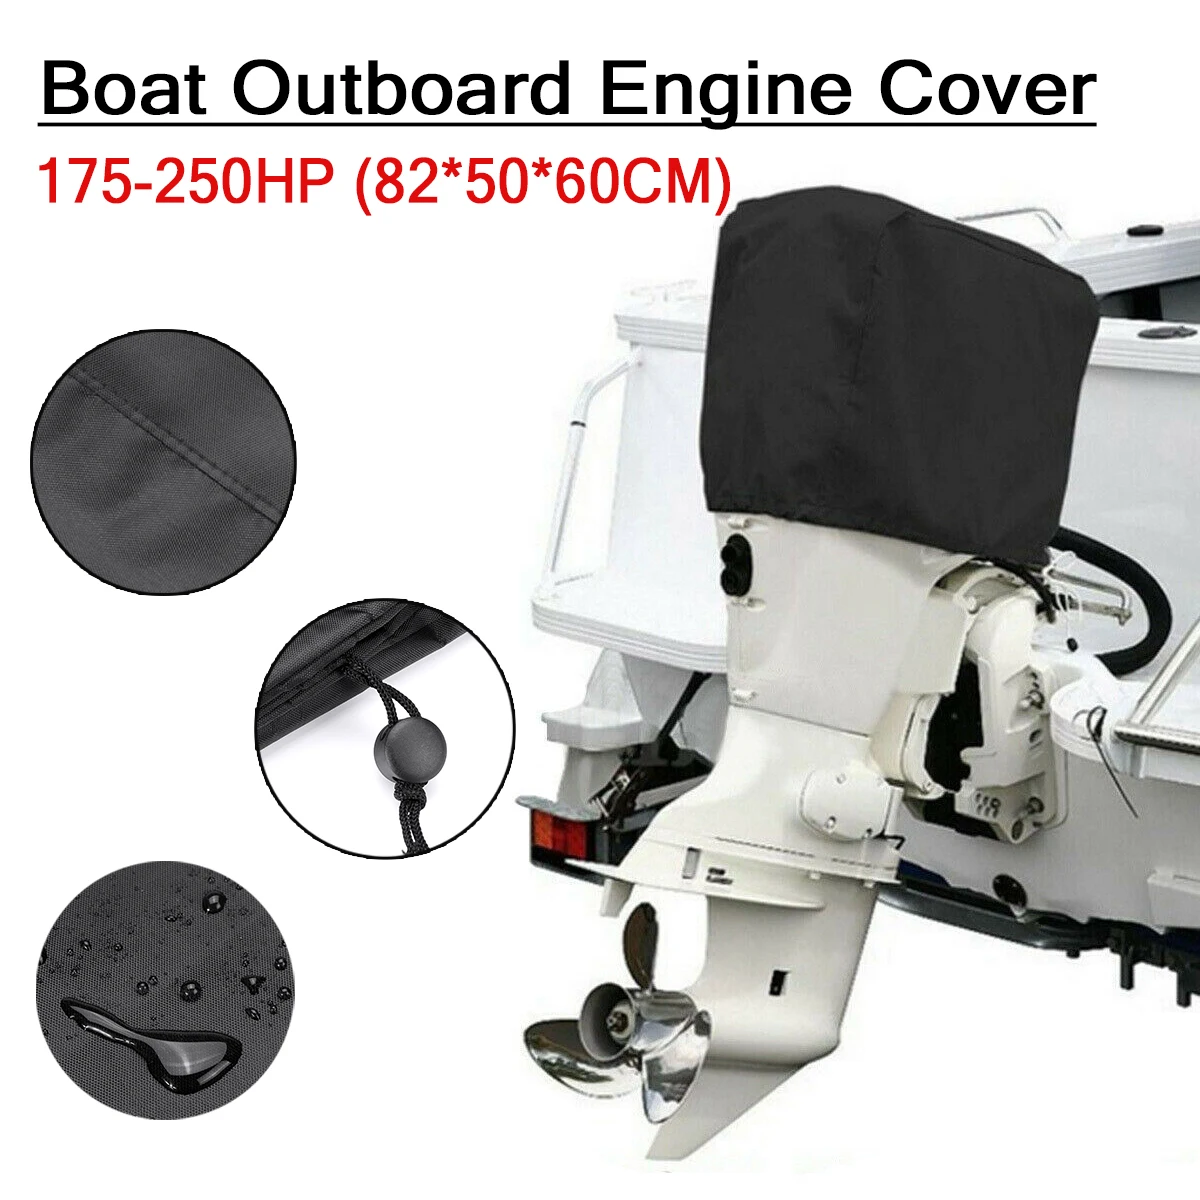 

210D forford Boat 15-250HP Motor Cover Outboard Engine Protector Covers Waterproof 15 30 60 100 150 170 250 PH Motor Heavy-Duty